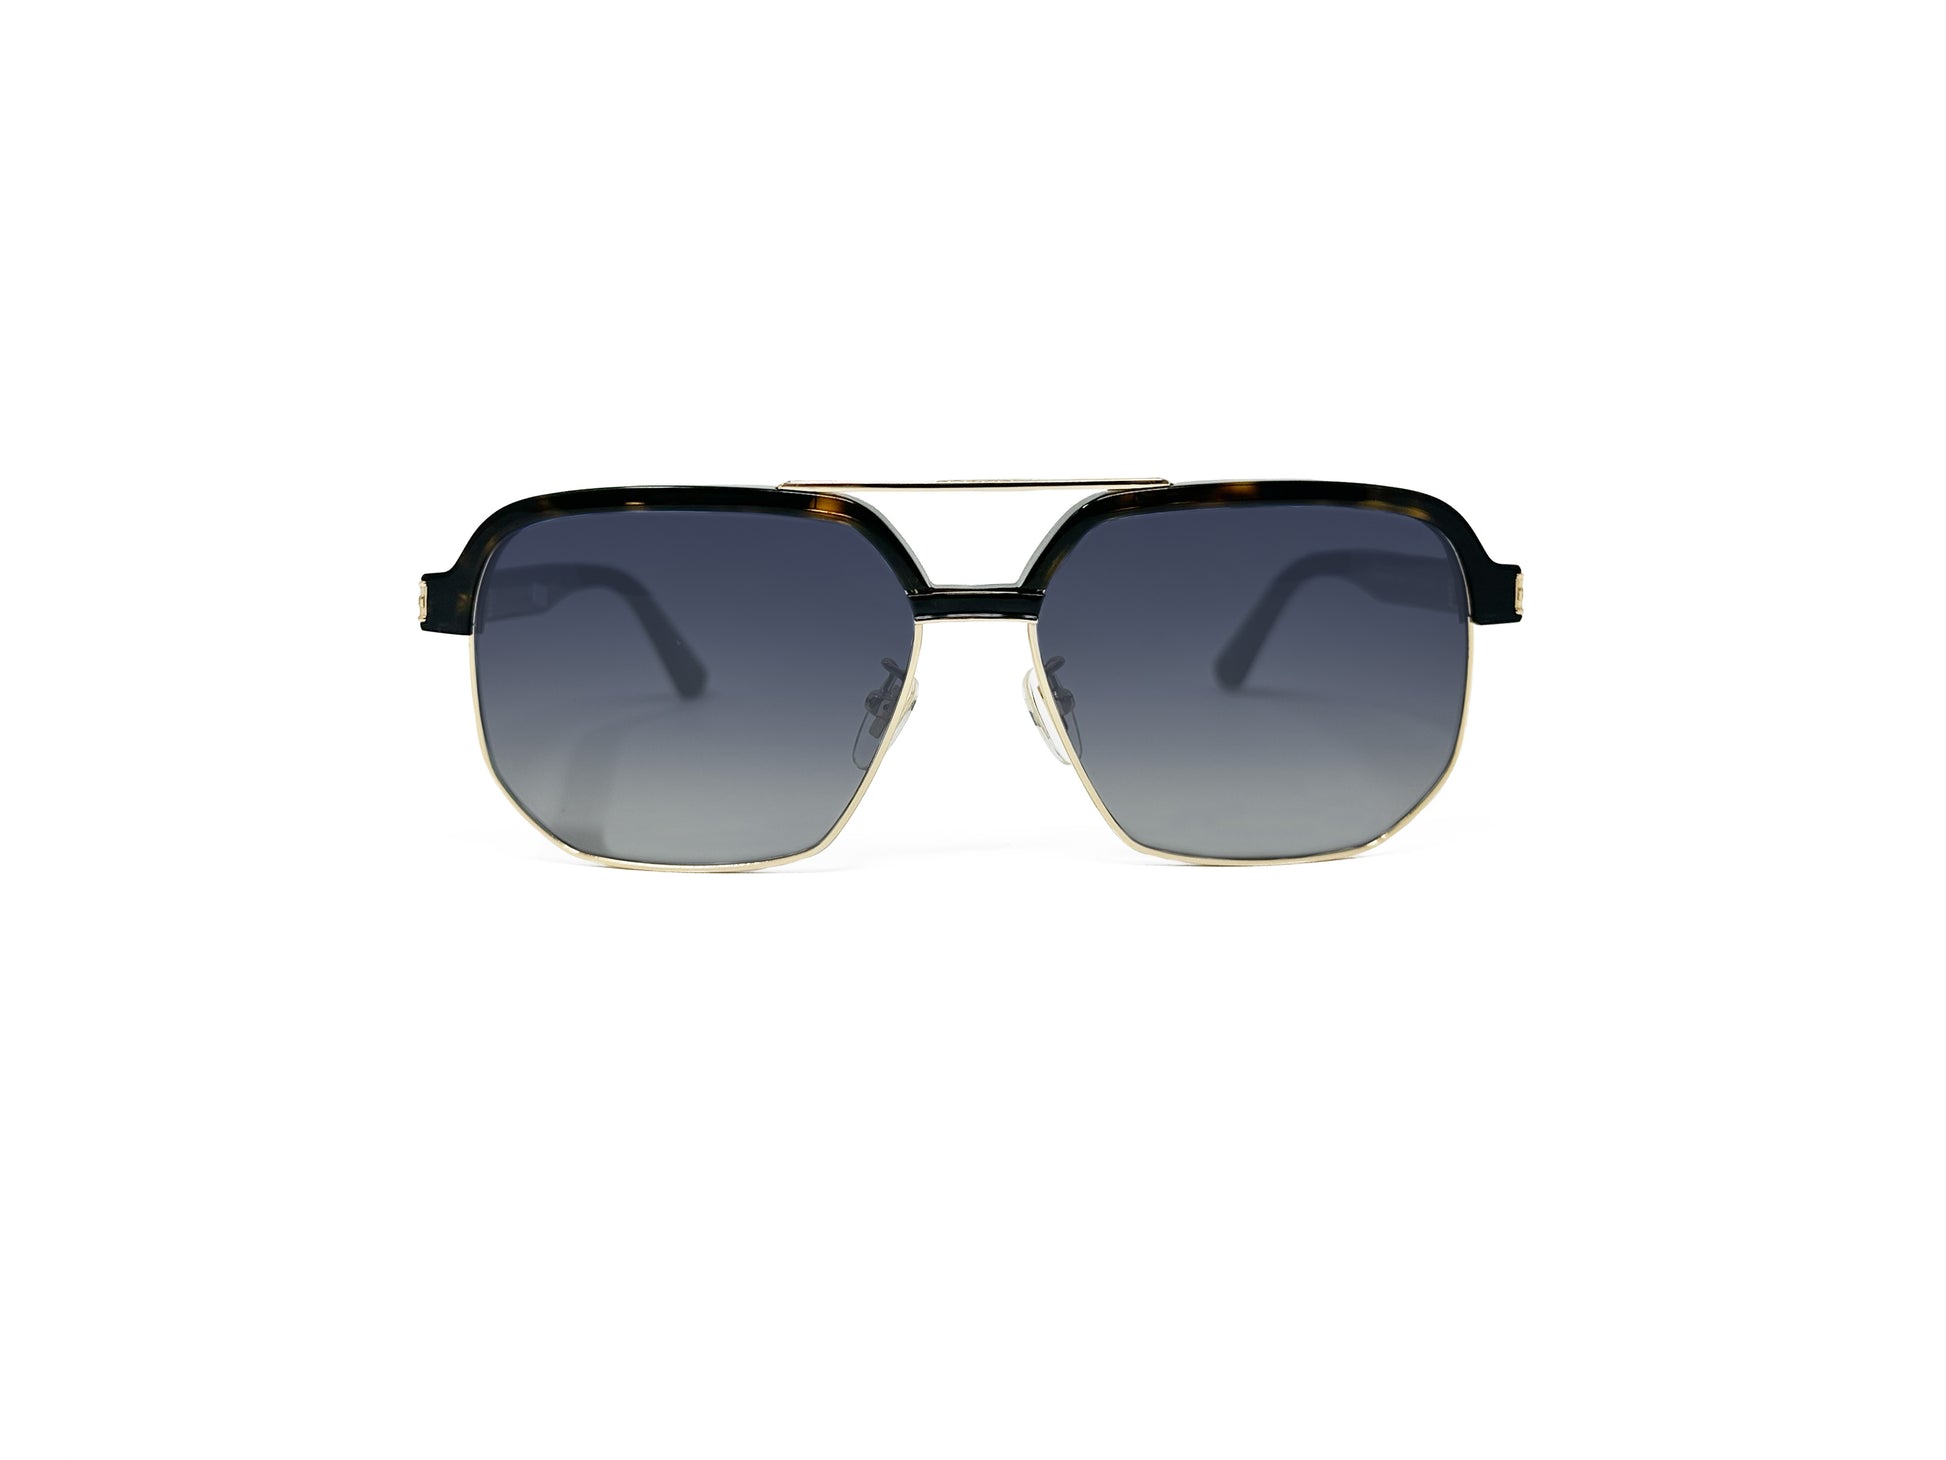 Police squared aviator style sunglass with bar across top. Model: SPLF11 Origins Hero 1. Color: 0301. Front view. 